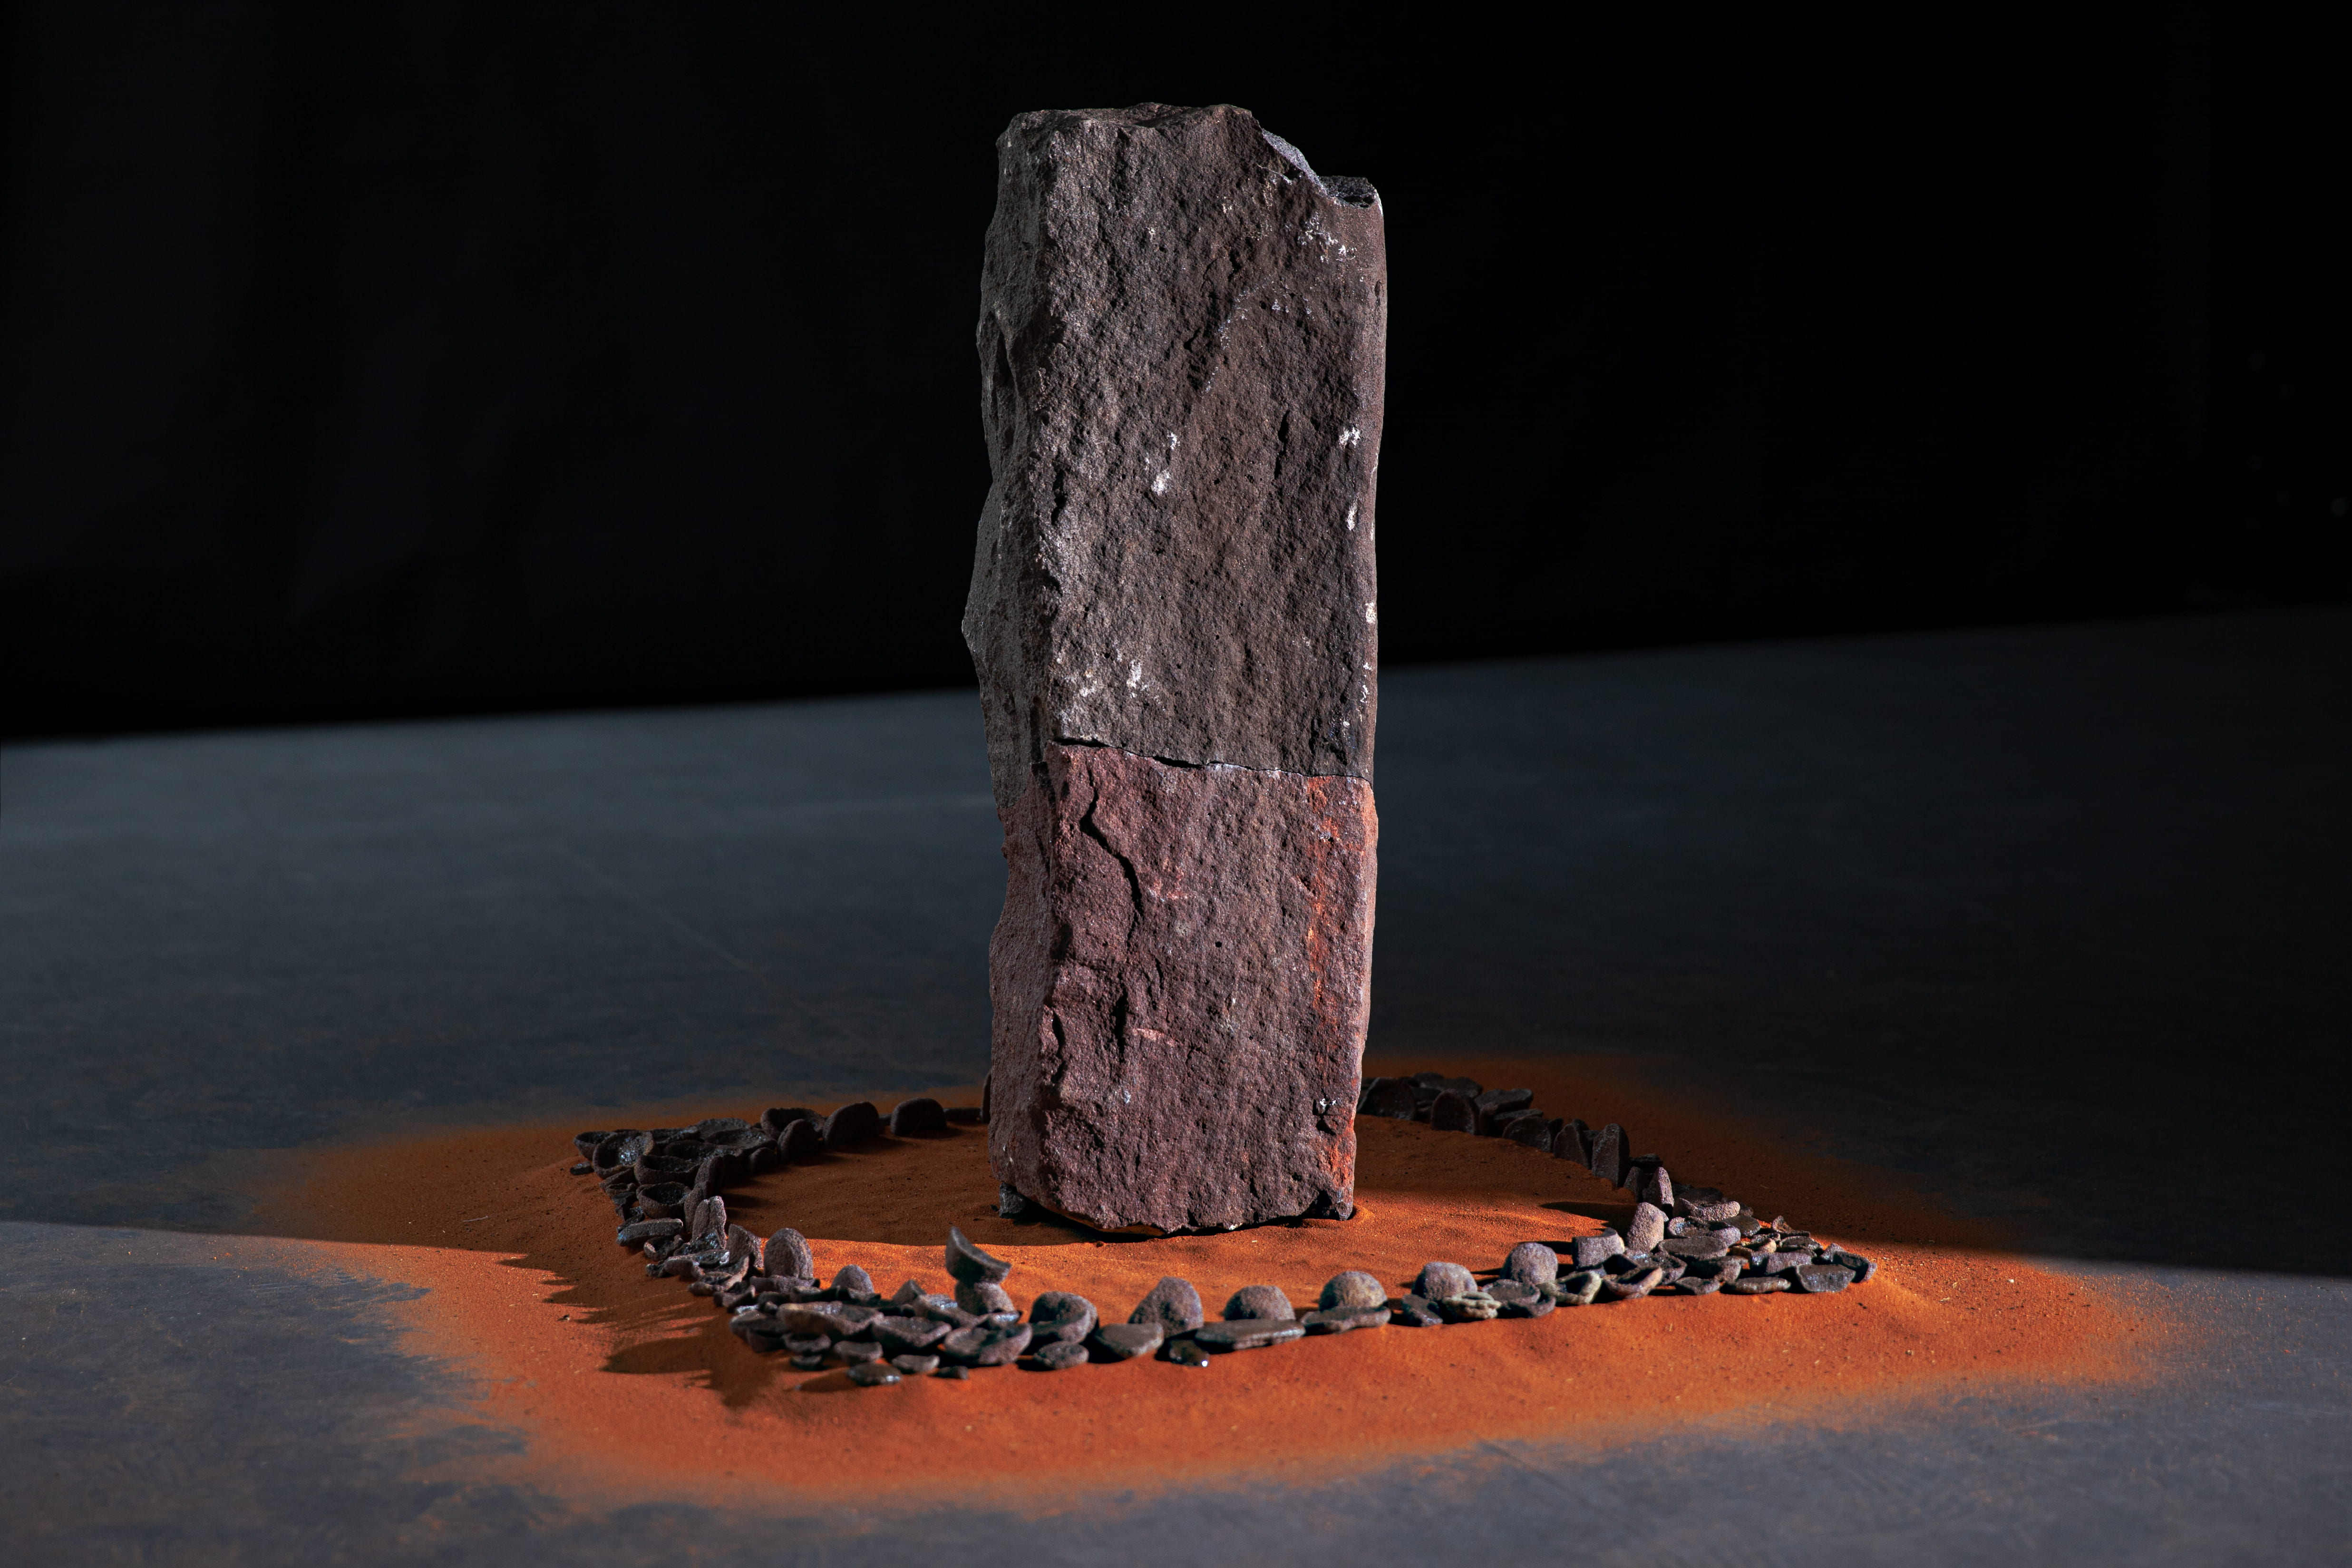 A photograph of a sculpture. A pillar of stone stands upright on a bed of red sand, surrounded by a circle of small rocks. The bottom third of the pillar is a reddish purple colour, while the rest is a natural blue-grey. 